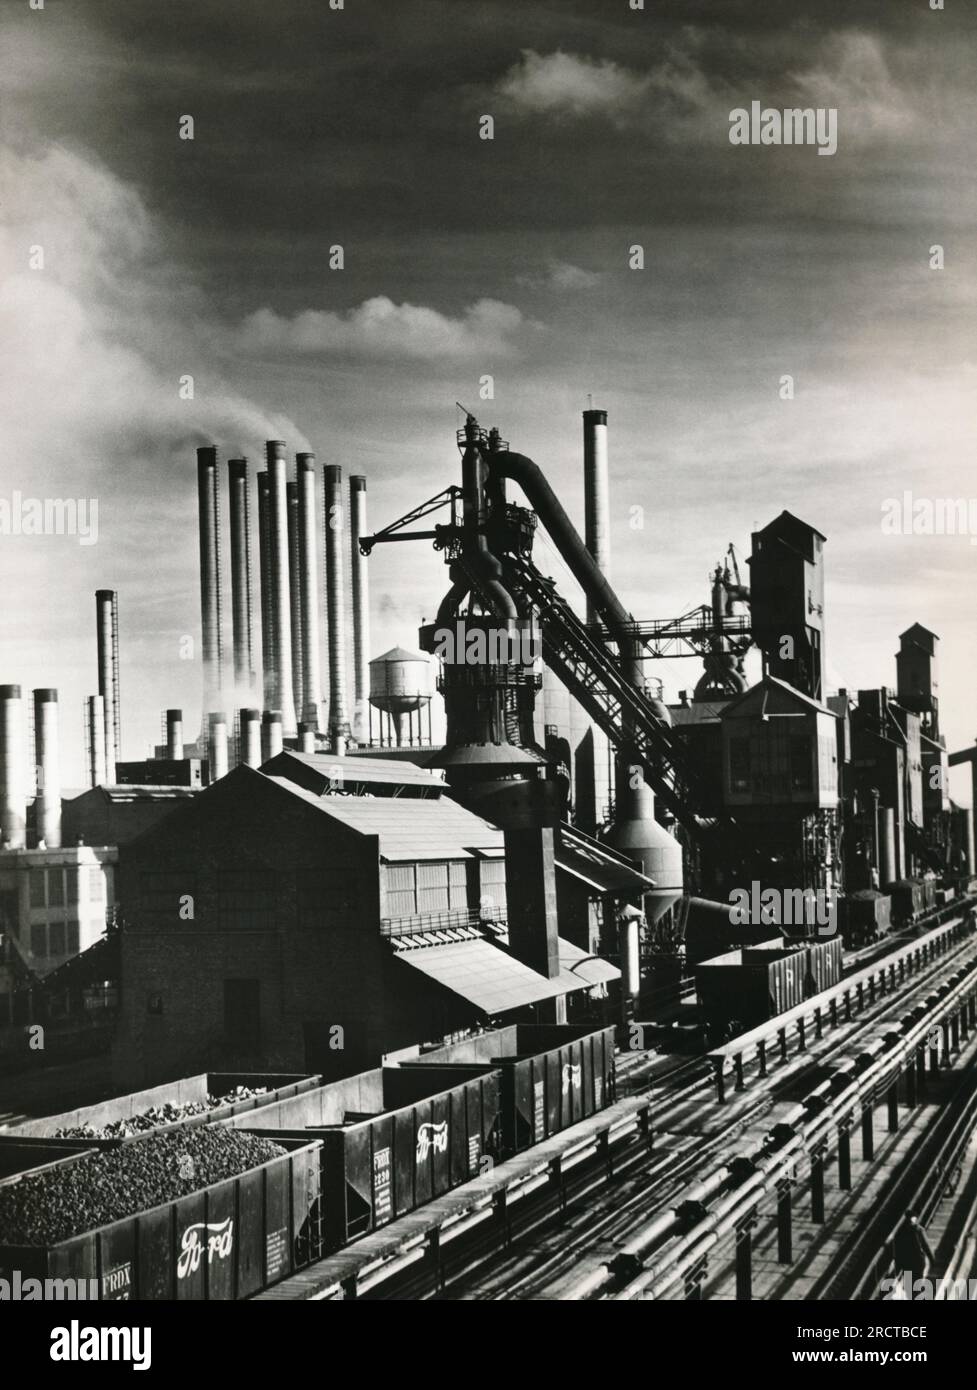 Dearborn, Michigan: 1937 Ford Motor Company's River Rouge plant Stockfoto